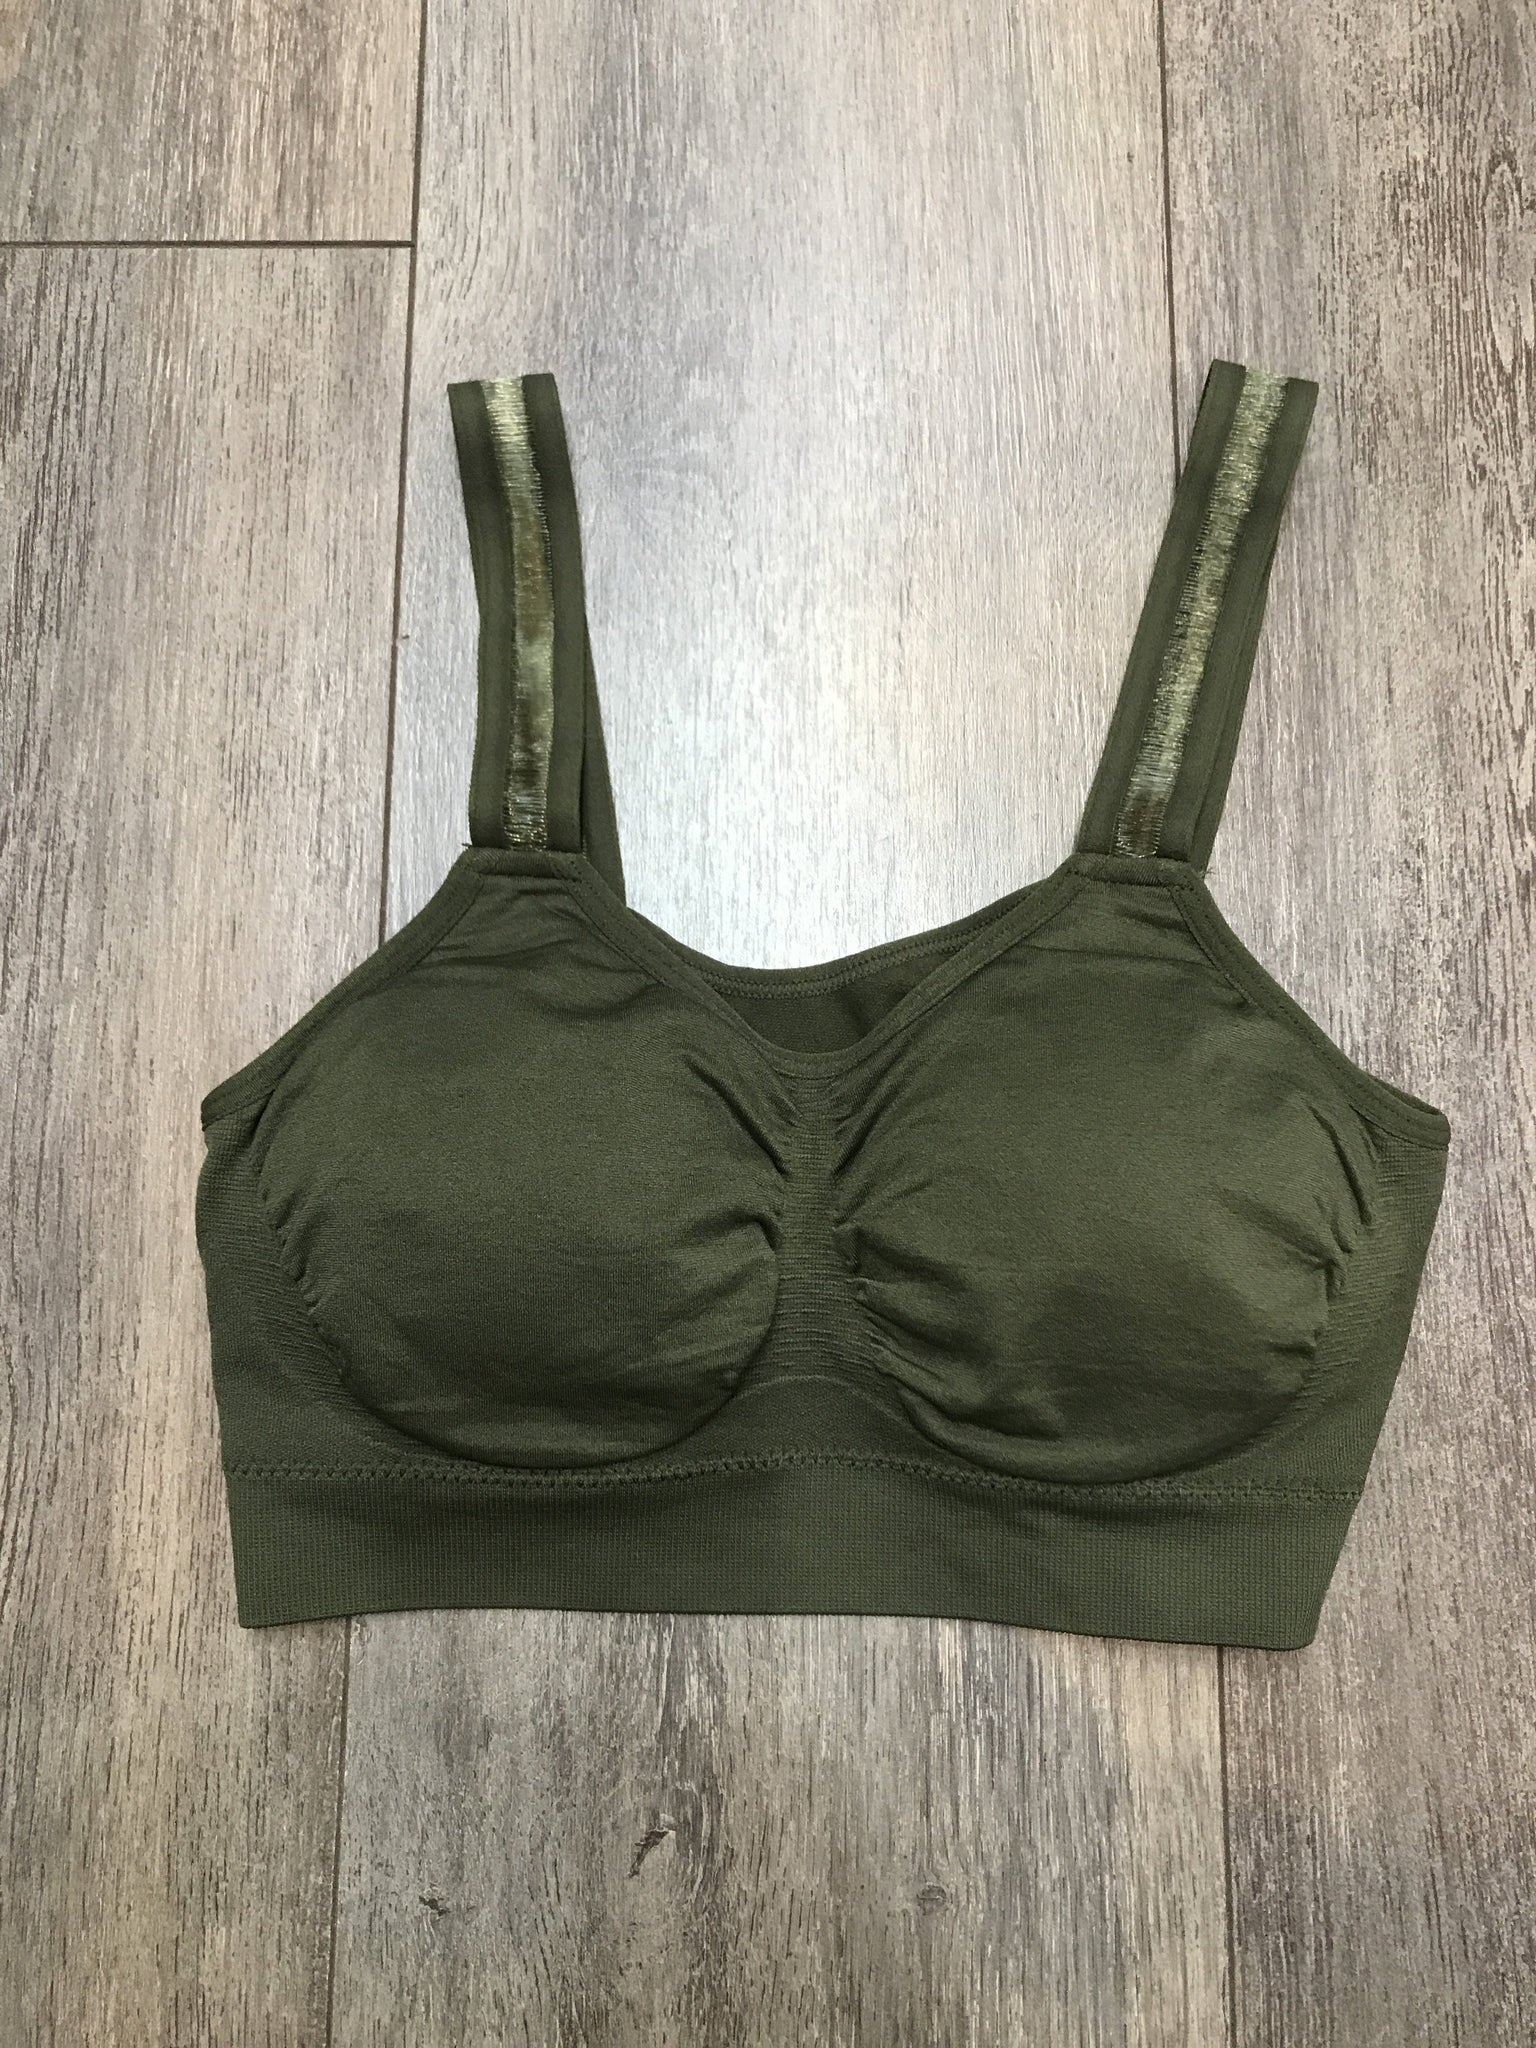 OLIVE SHEER (attached to olive bra)